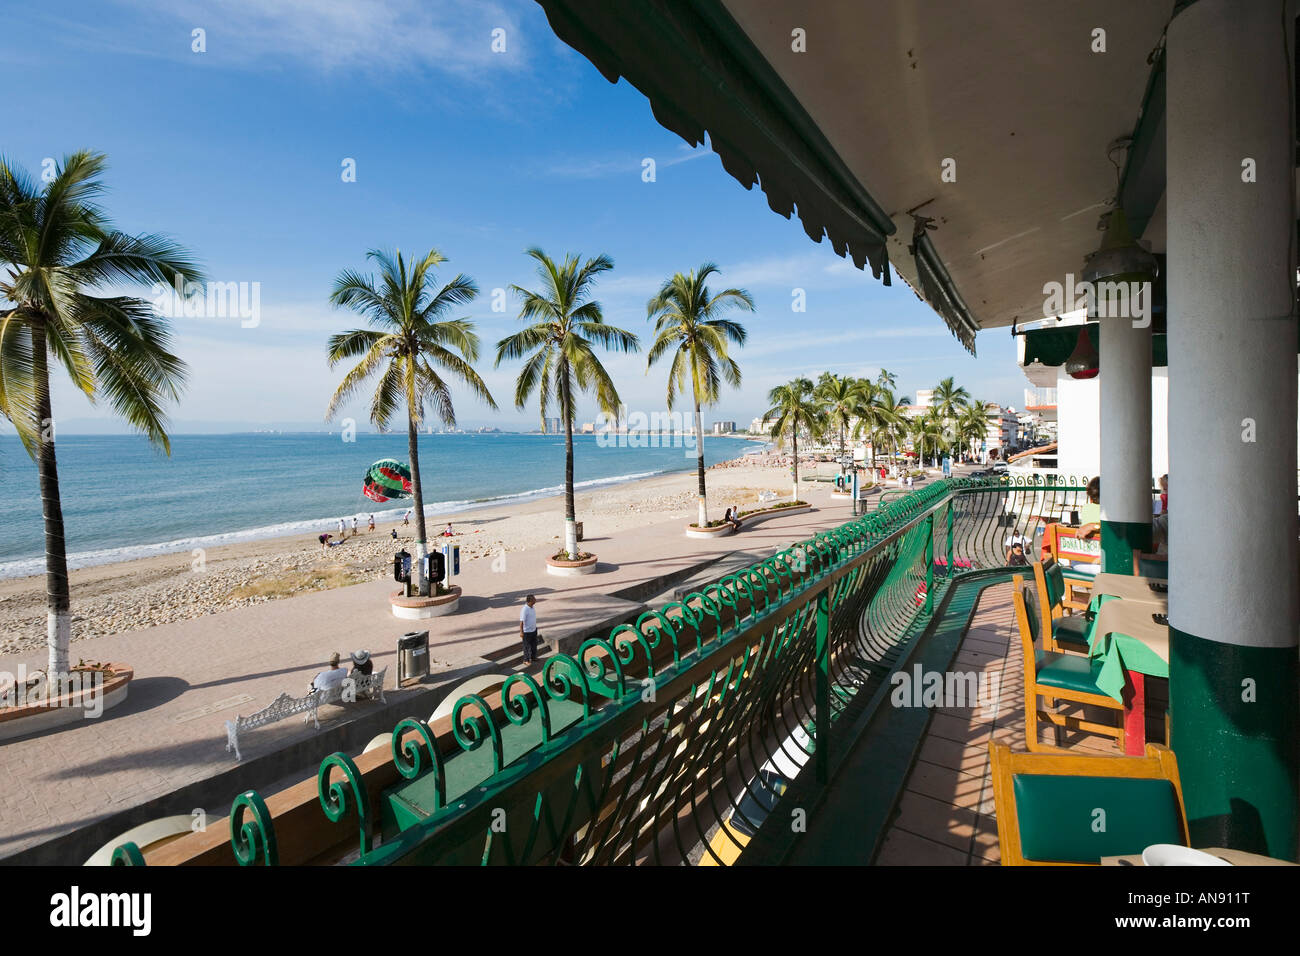 View from Terrace of Seafront Restaurant, Malecon, Old Town, Puerto Vallarta, Jalisco, Mexico Stock Photo